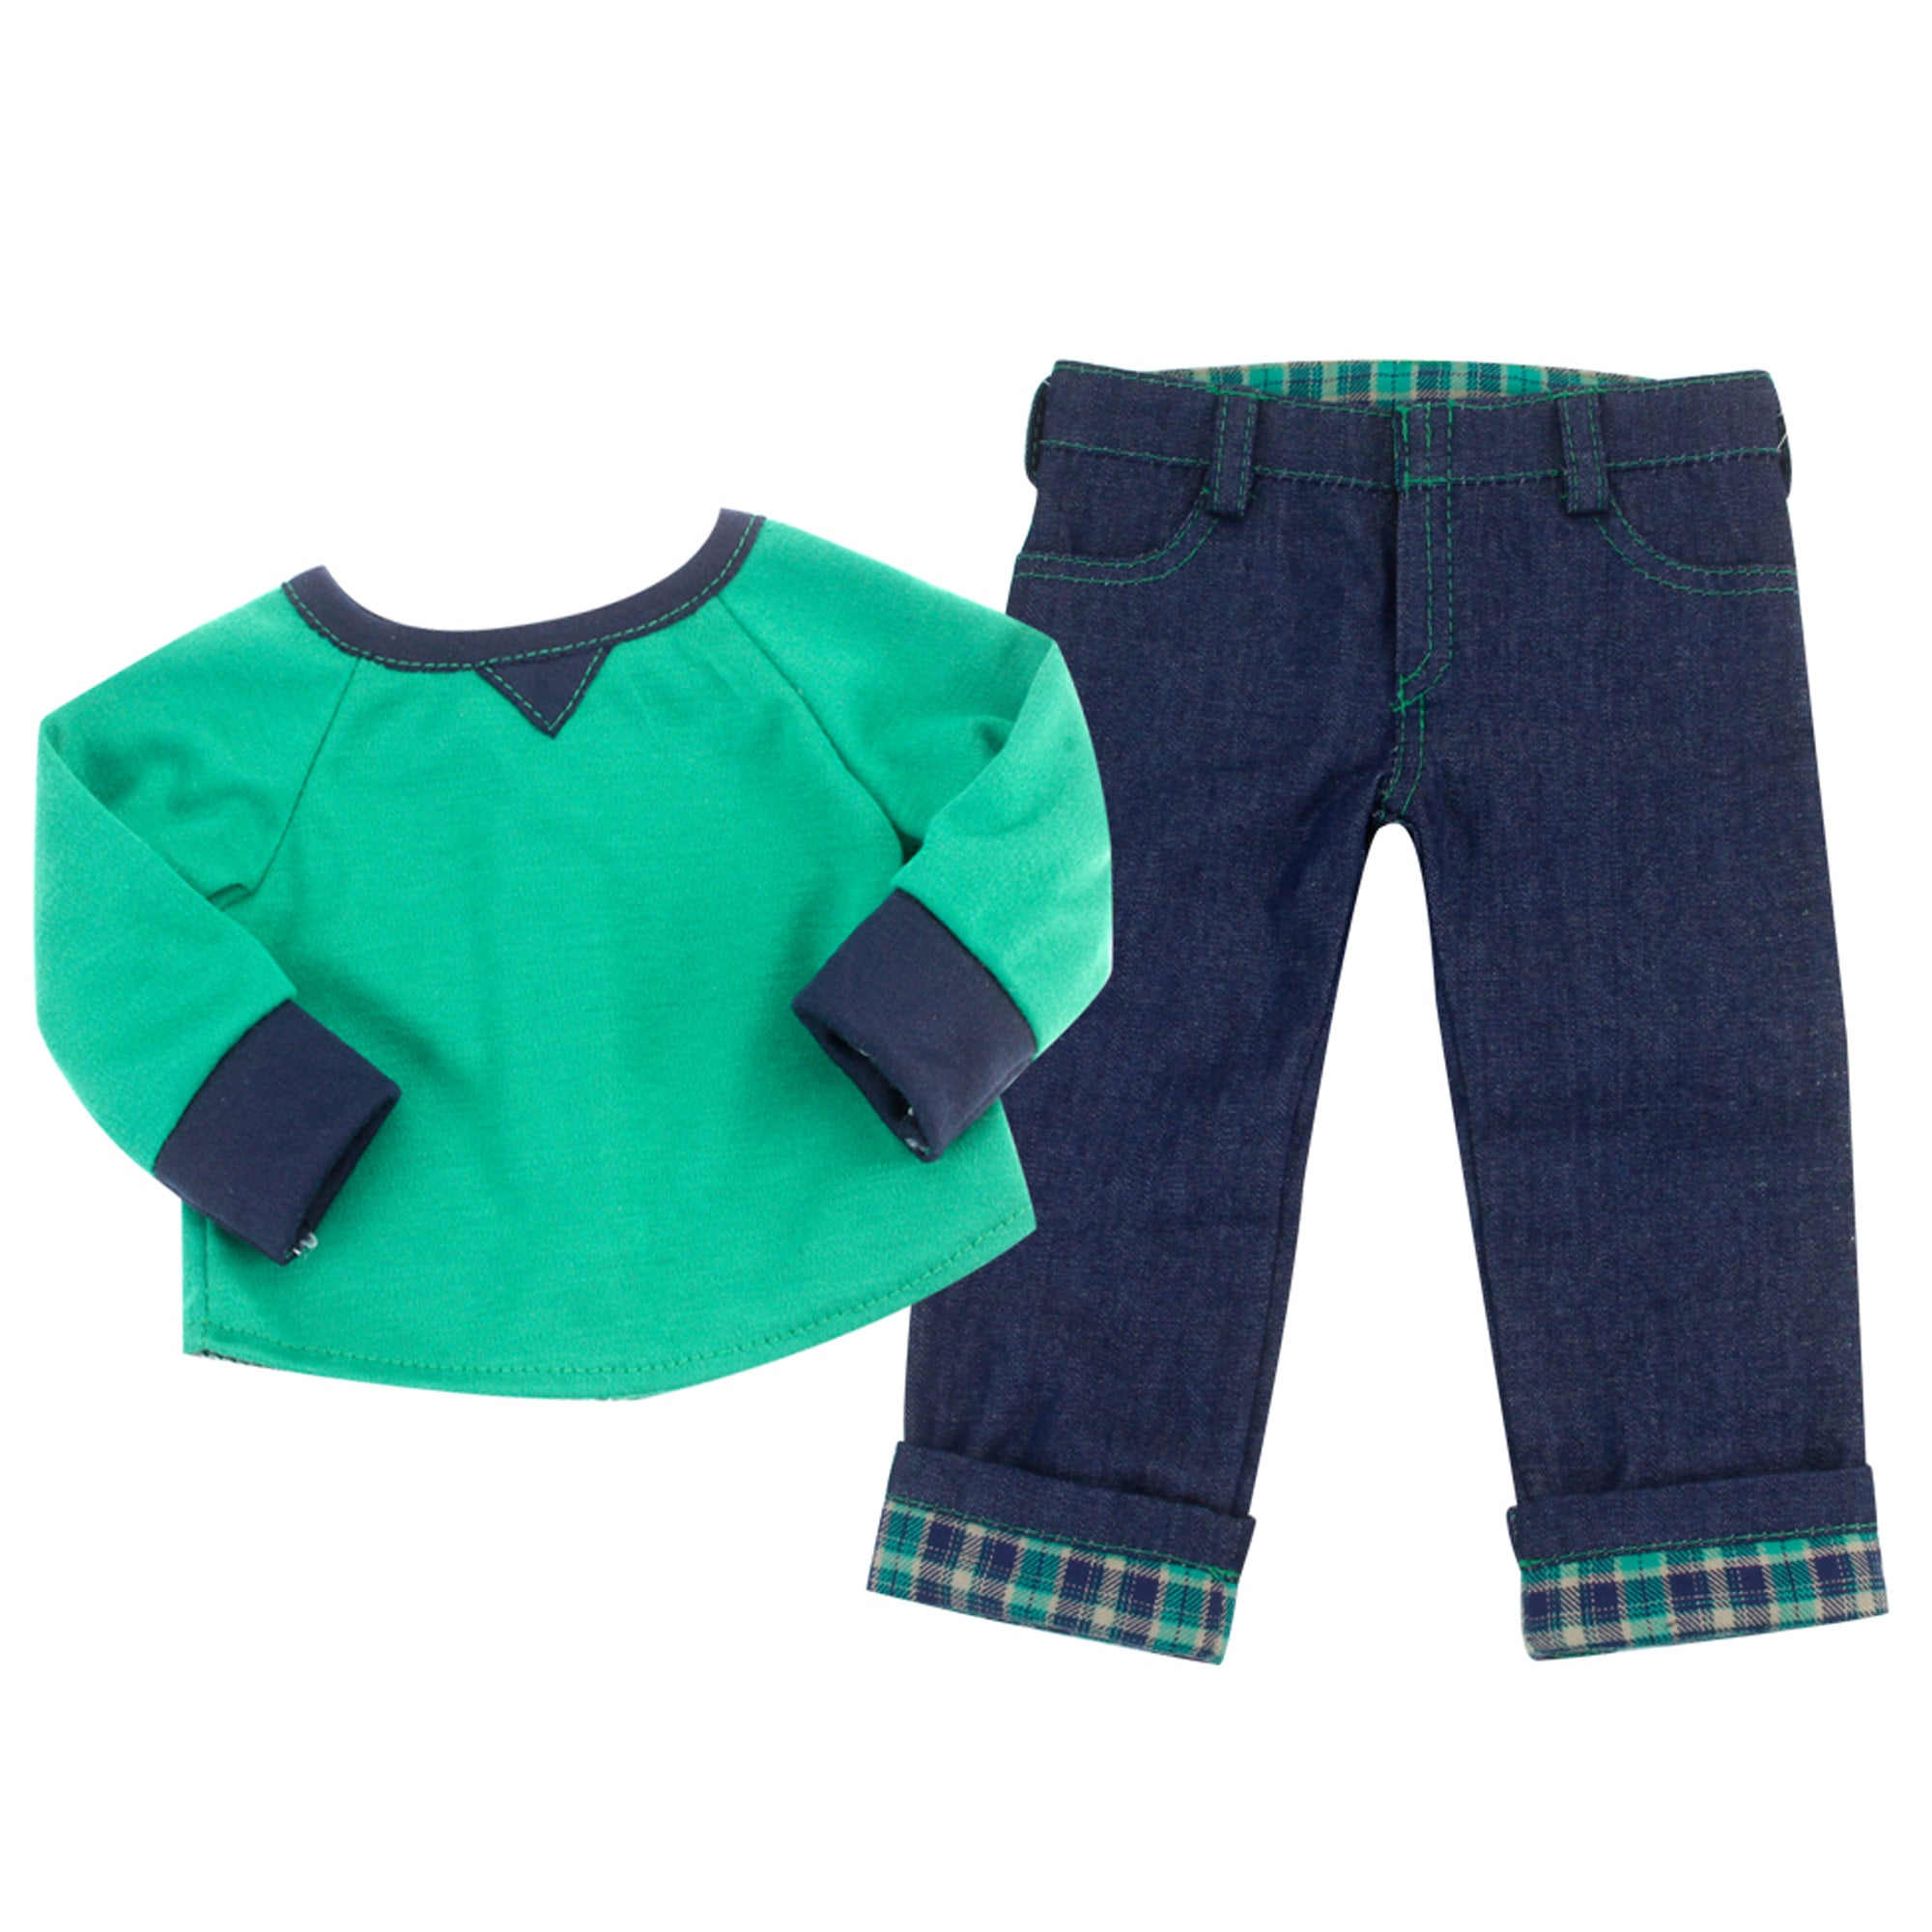 Sophia’s Shirt, Jeans, and Penny Loafers Set for 18" Boy Dolls